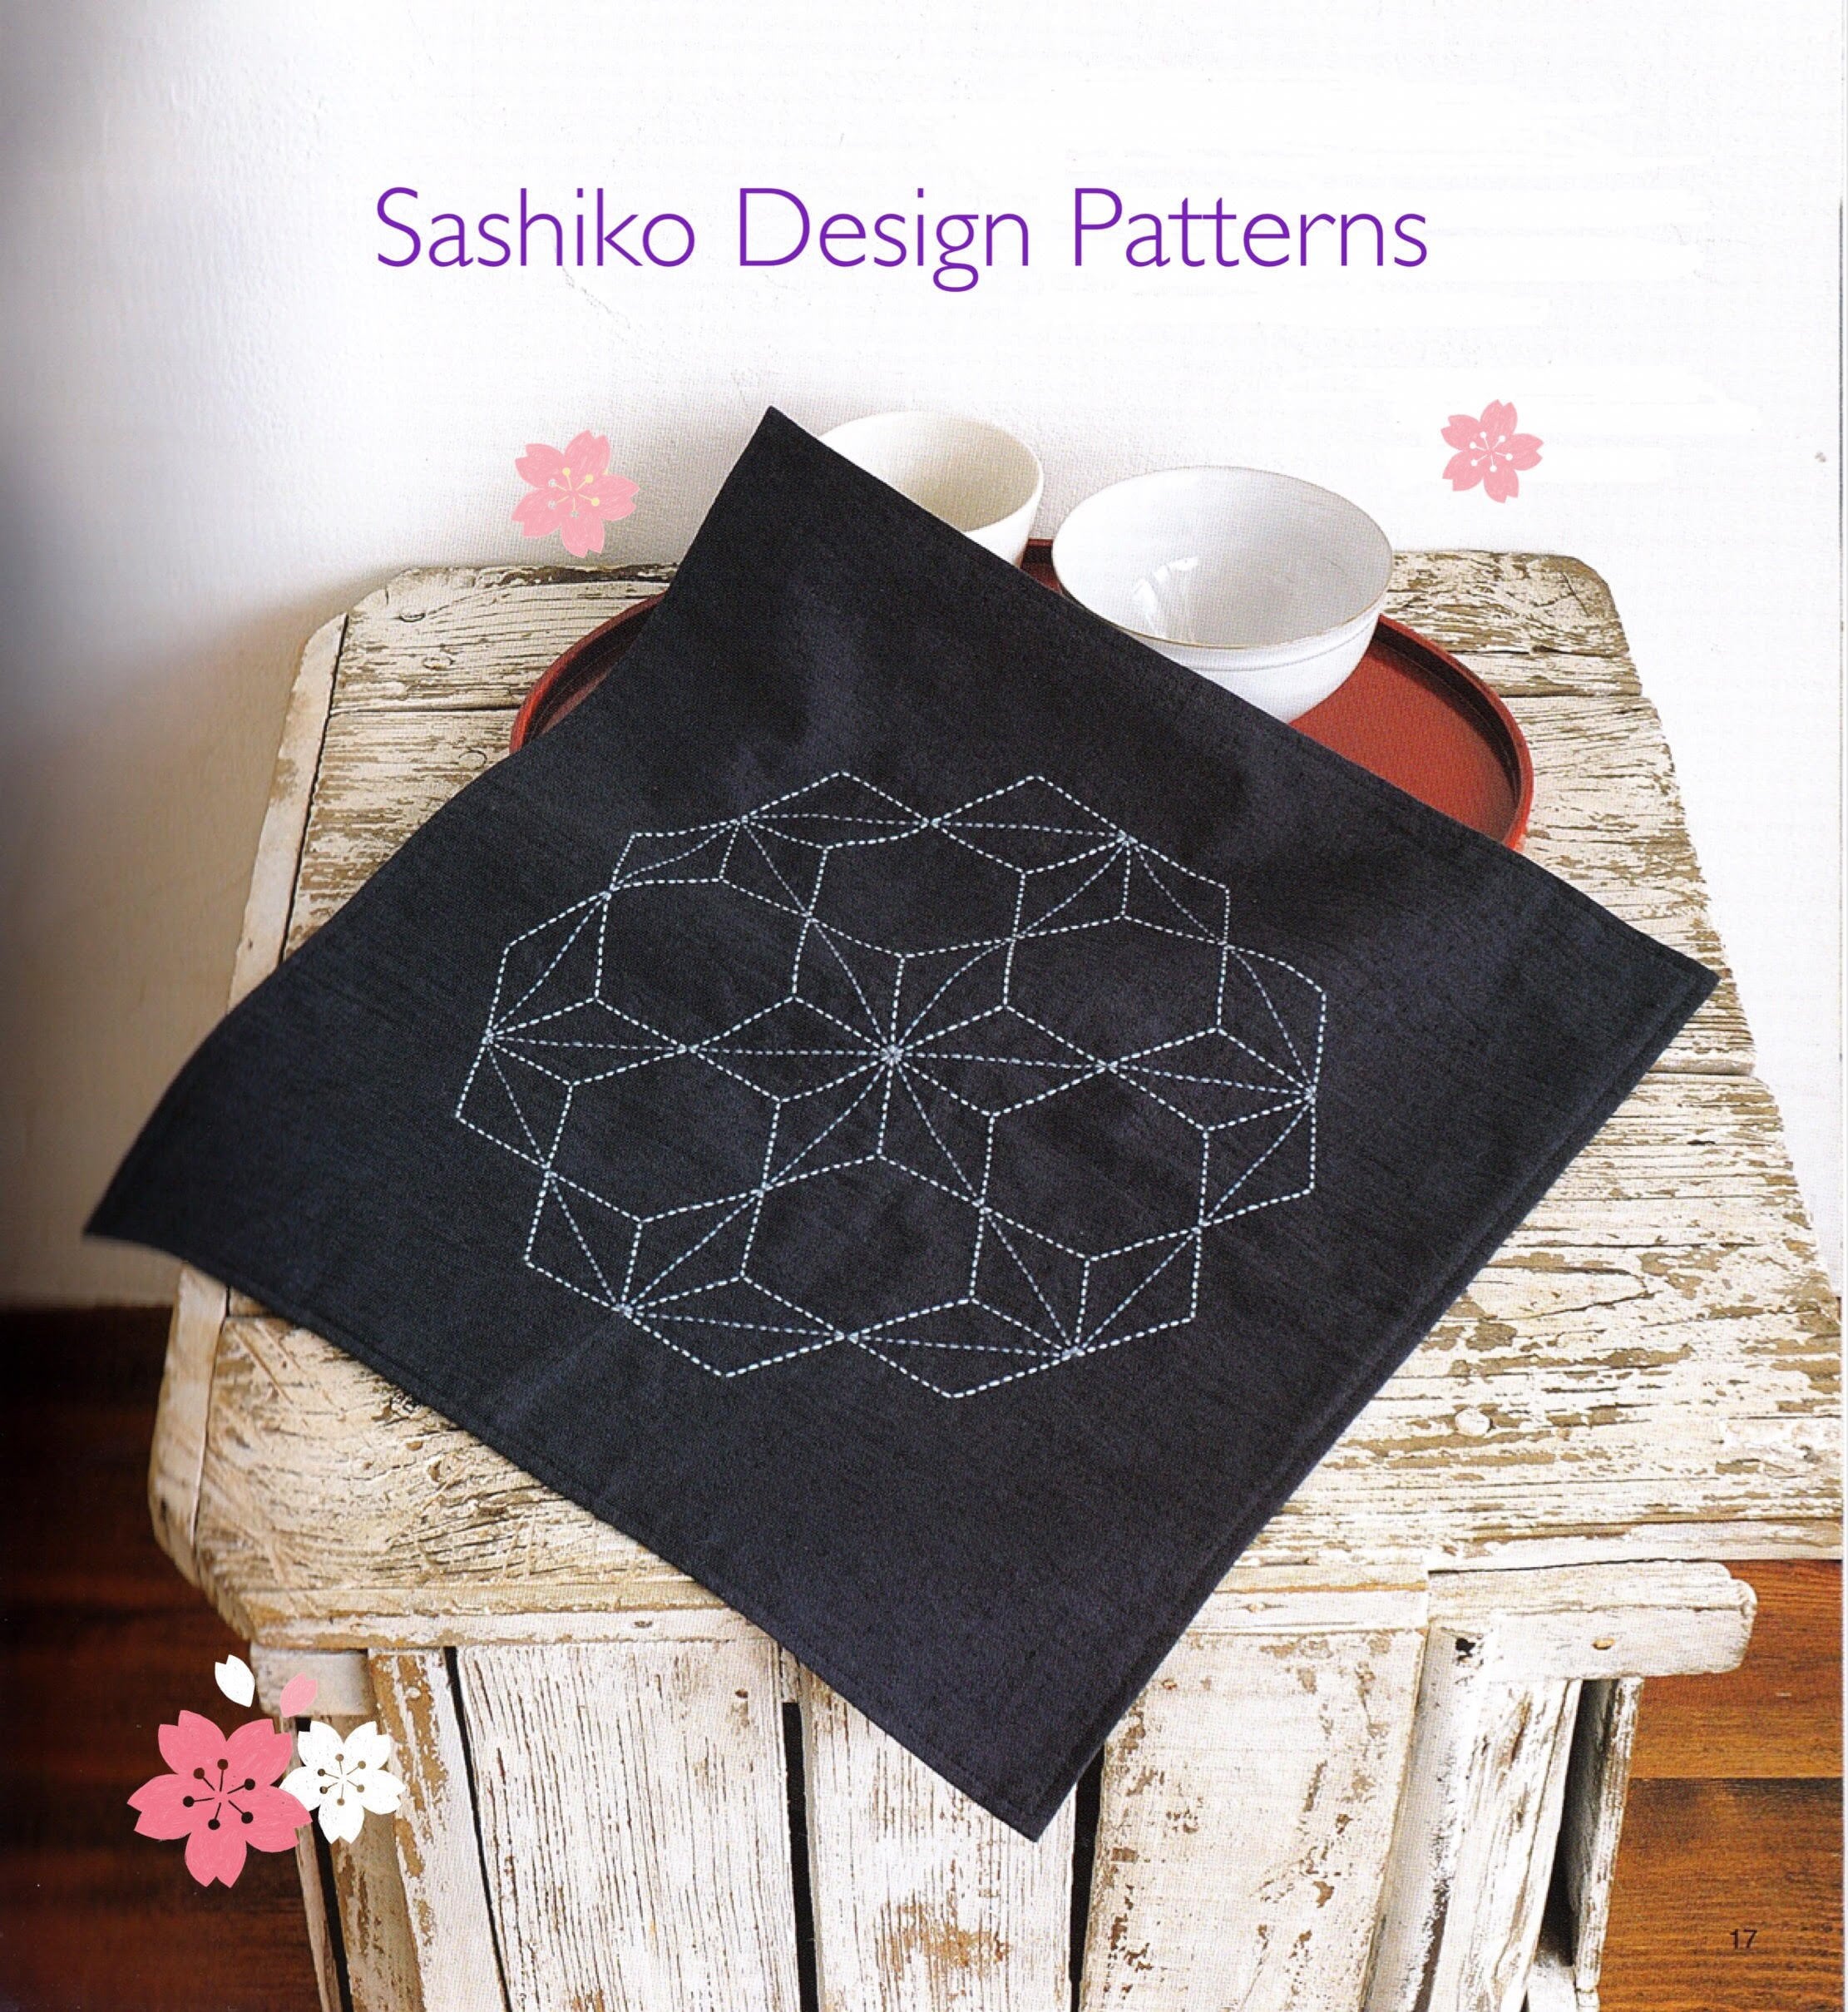 Set of 6 Sashiko Style Patterns, Nature Design, Hand Embroidery Design,  Instant Download, Needlepoint, Embroidery Patterns, Sashiko Style 